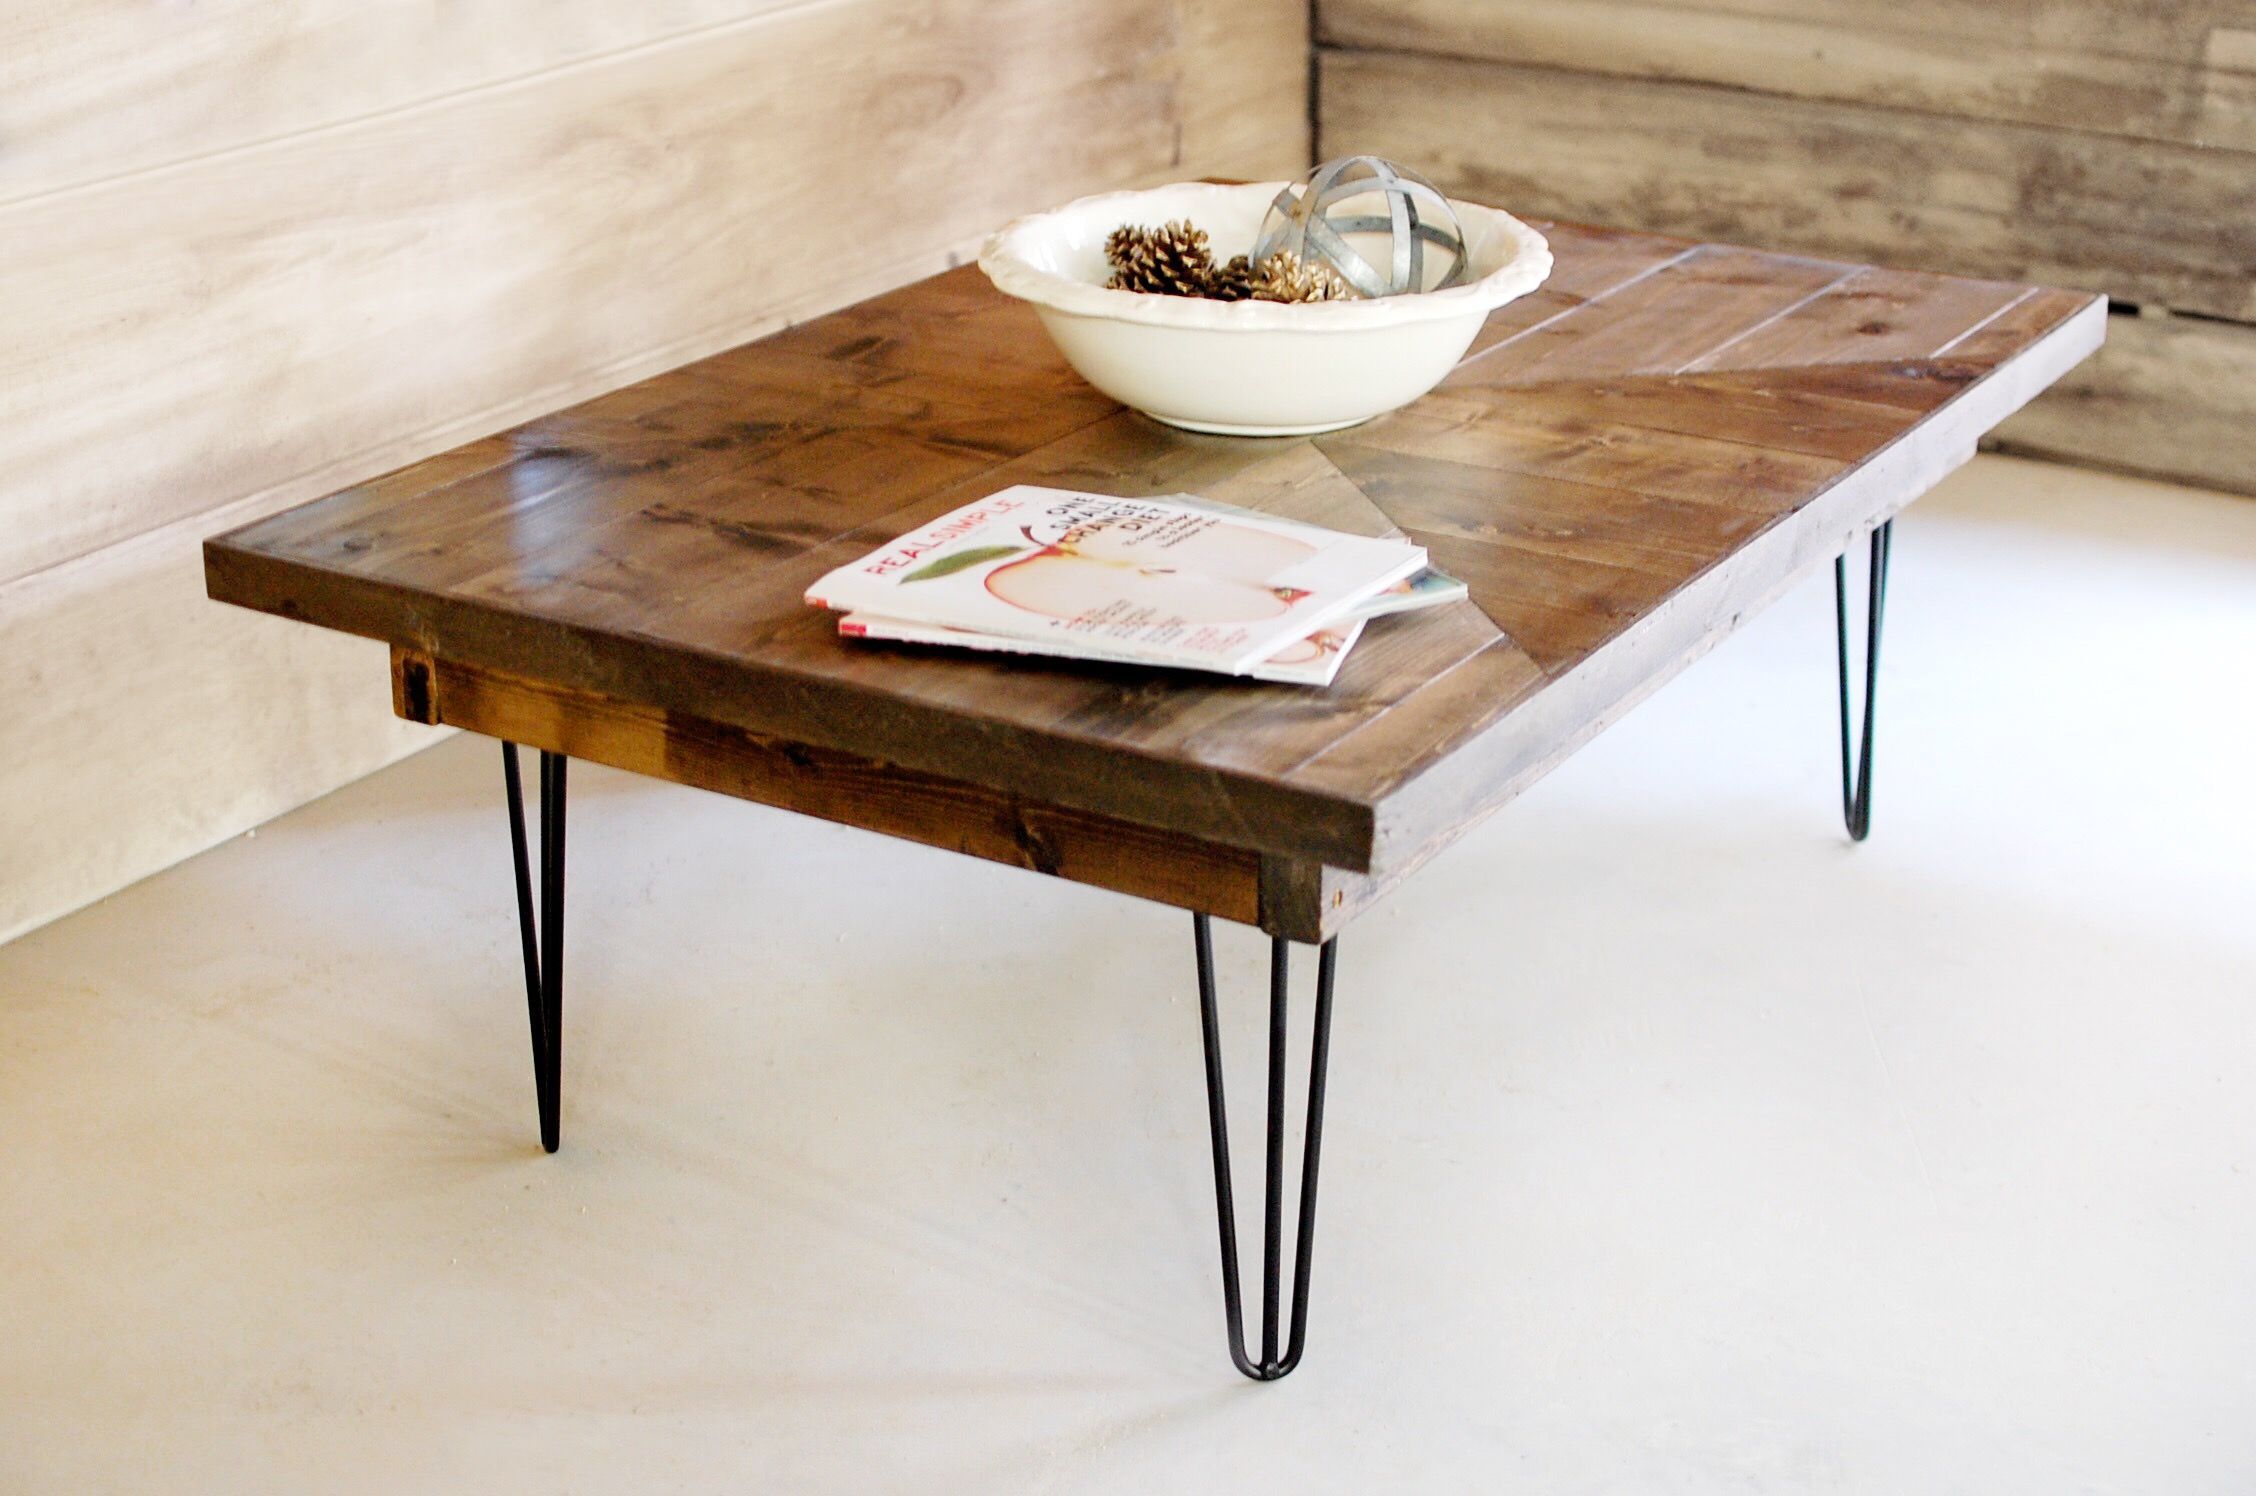 Hand Crafted Industrial, Mid Century Modern Wood Coffee Table Throughout Wooden Mid Century Coffee Tables (View 11 of 15)